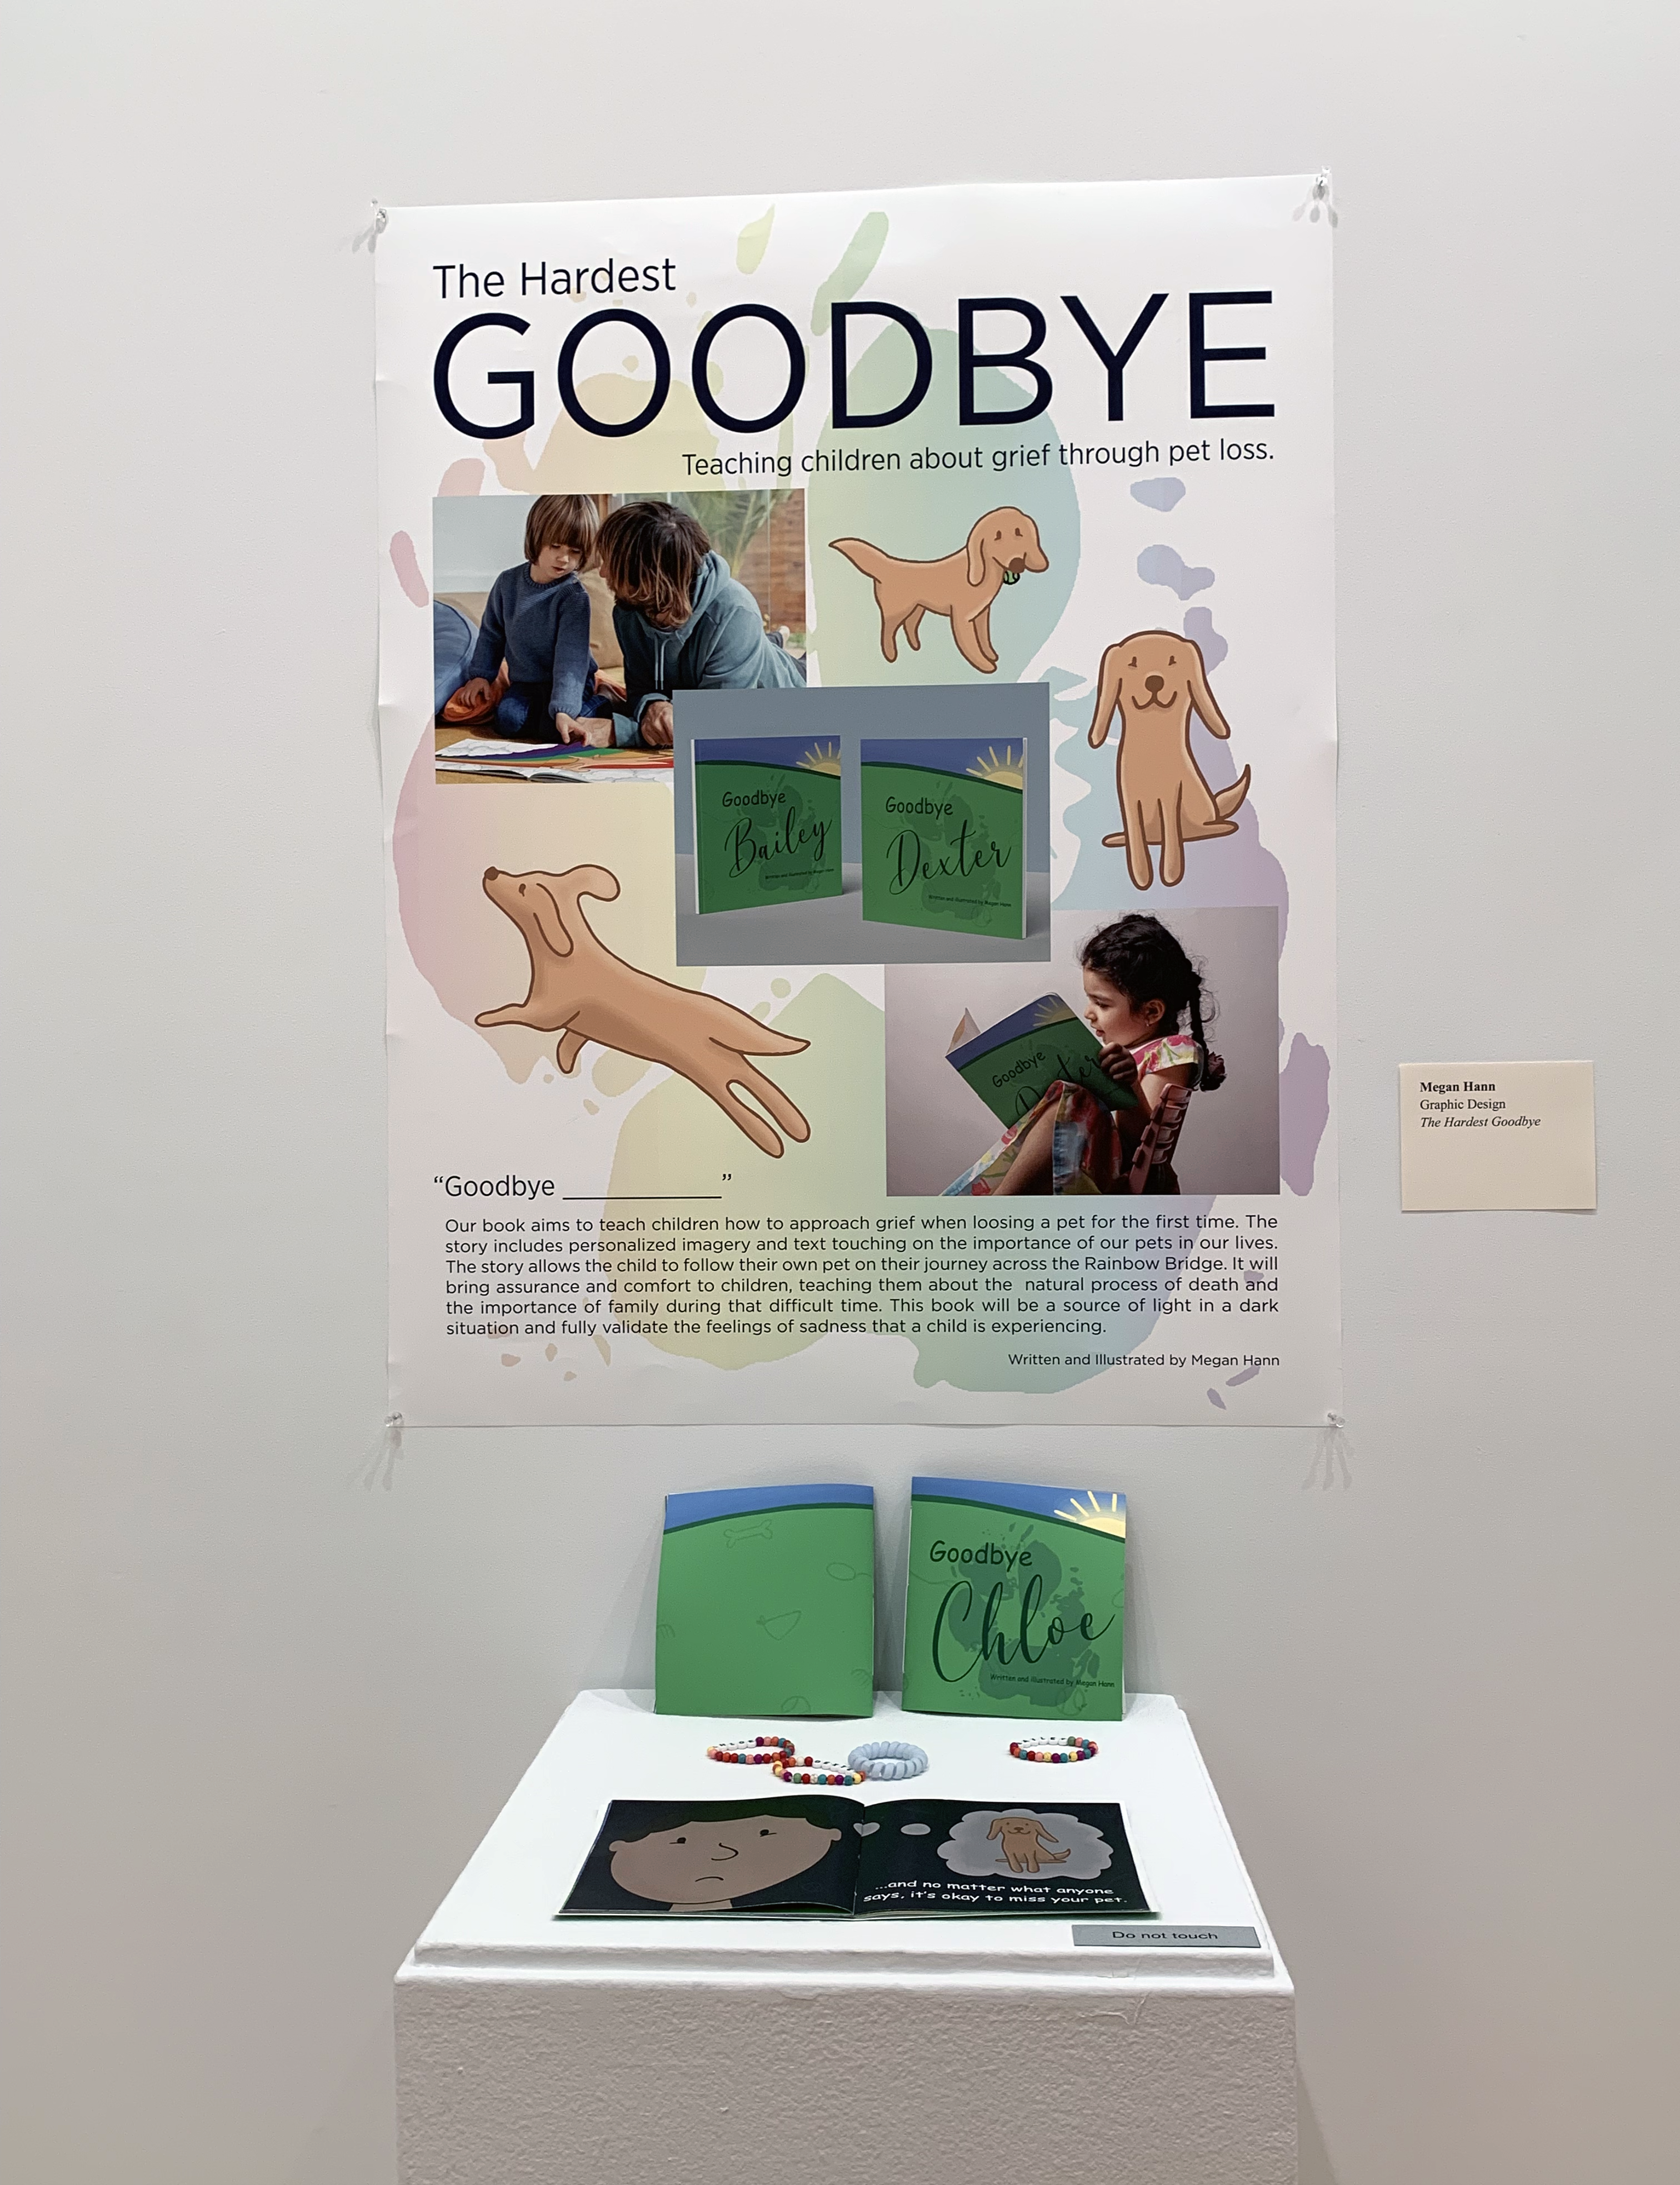 Poster and book samples explaining The Hardest Goodbye project for kids.